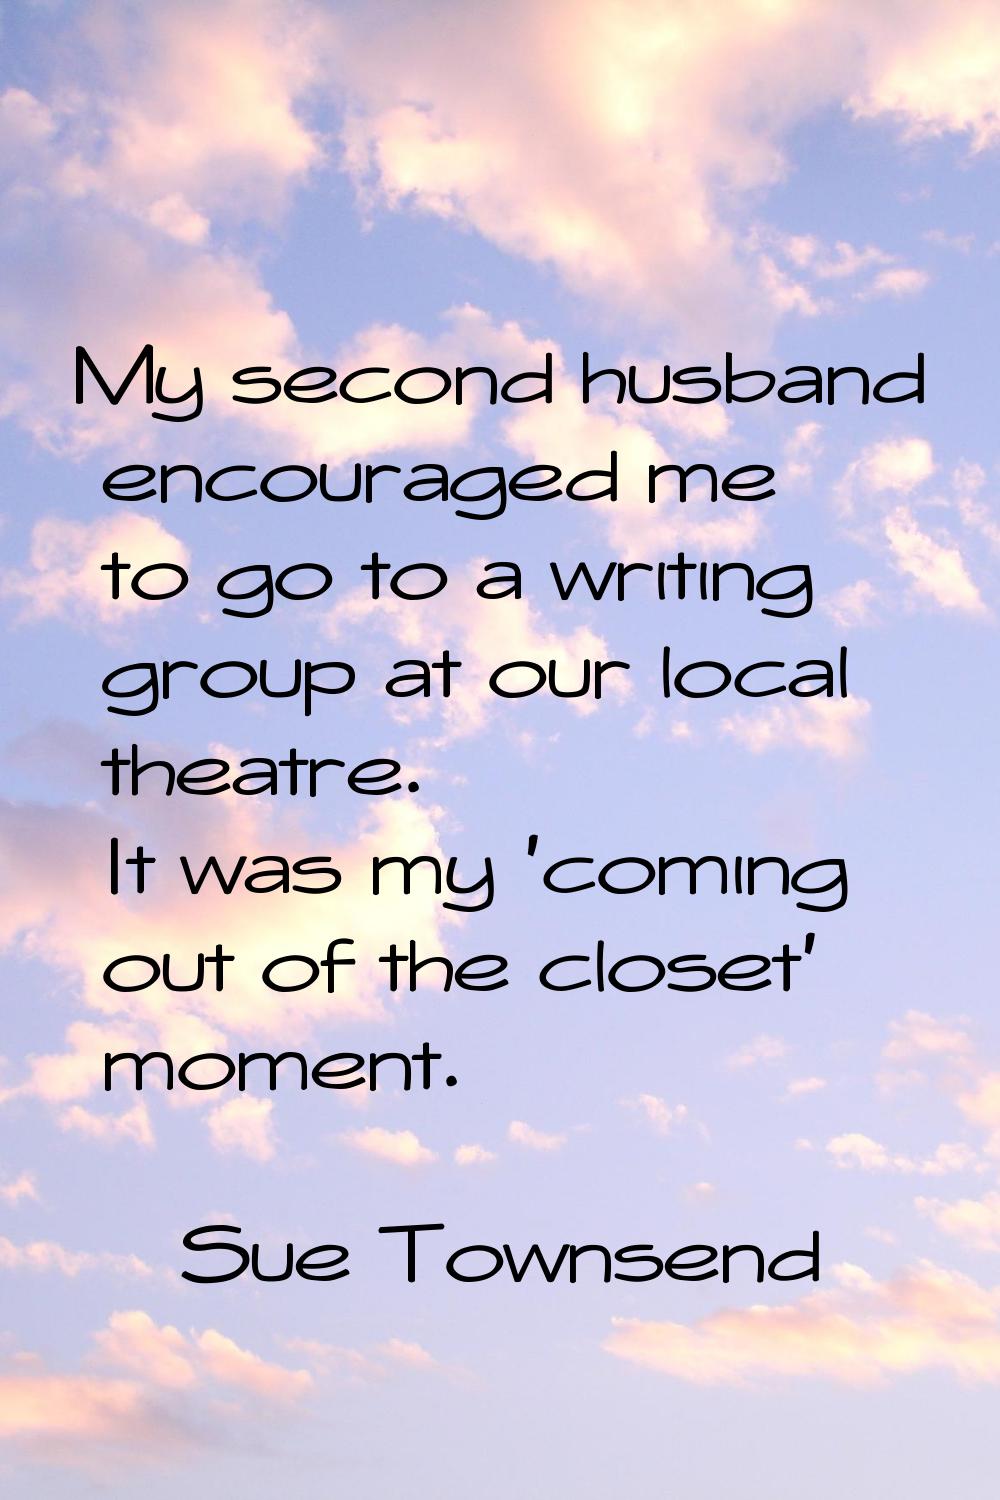 My second husband encouraged me to go to a writing group at our local theatre. It was my 'coming ou